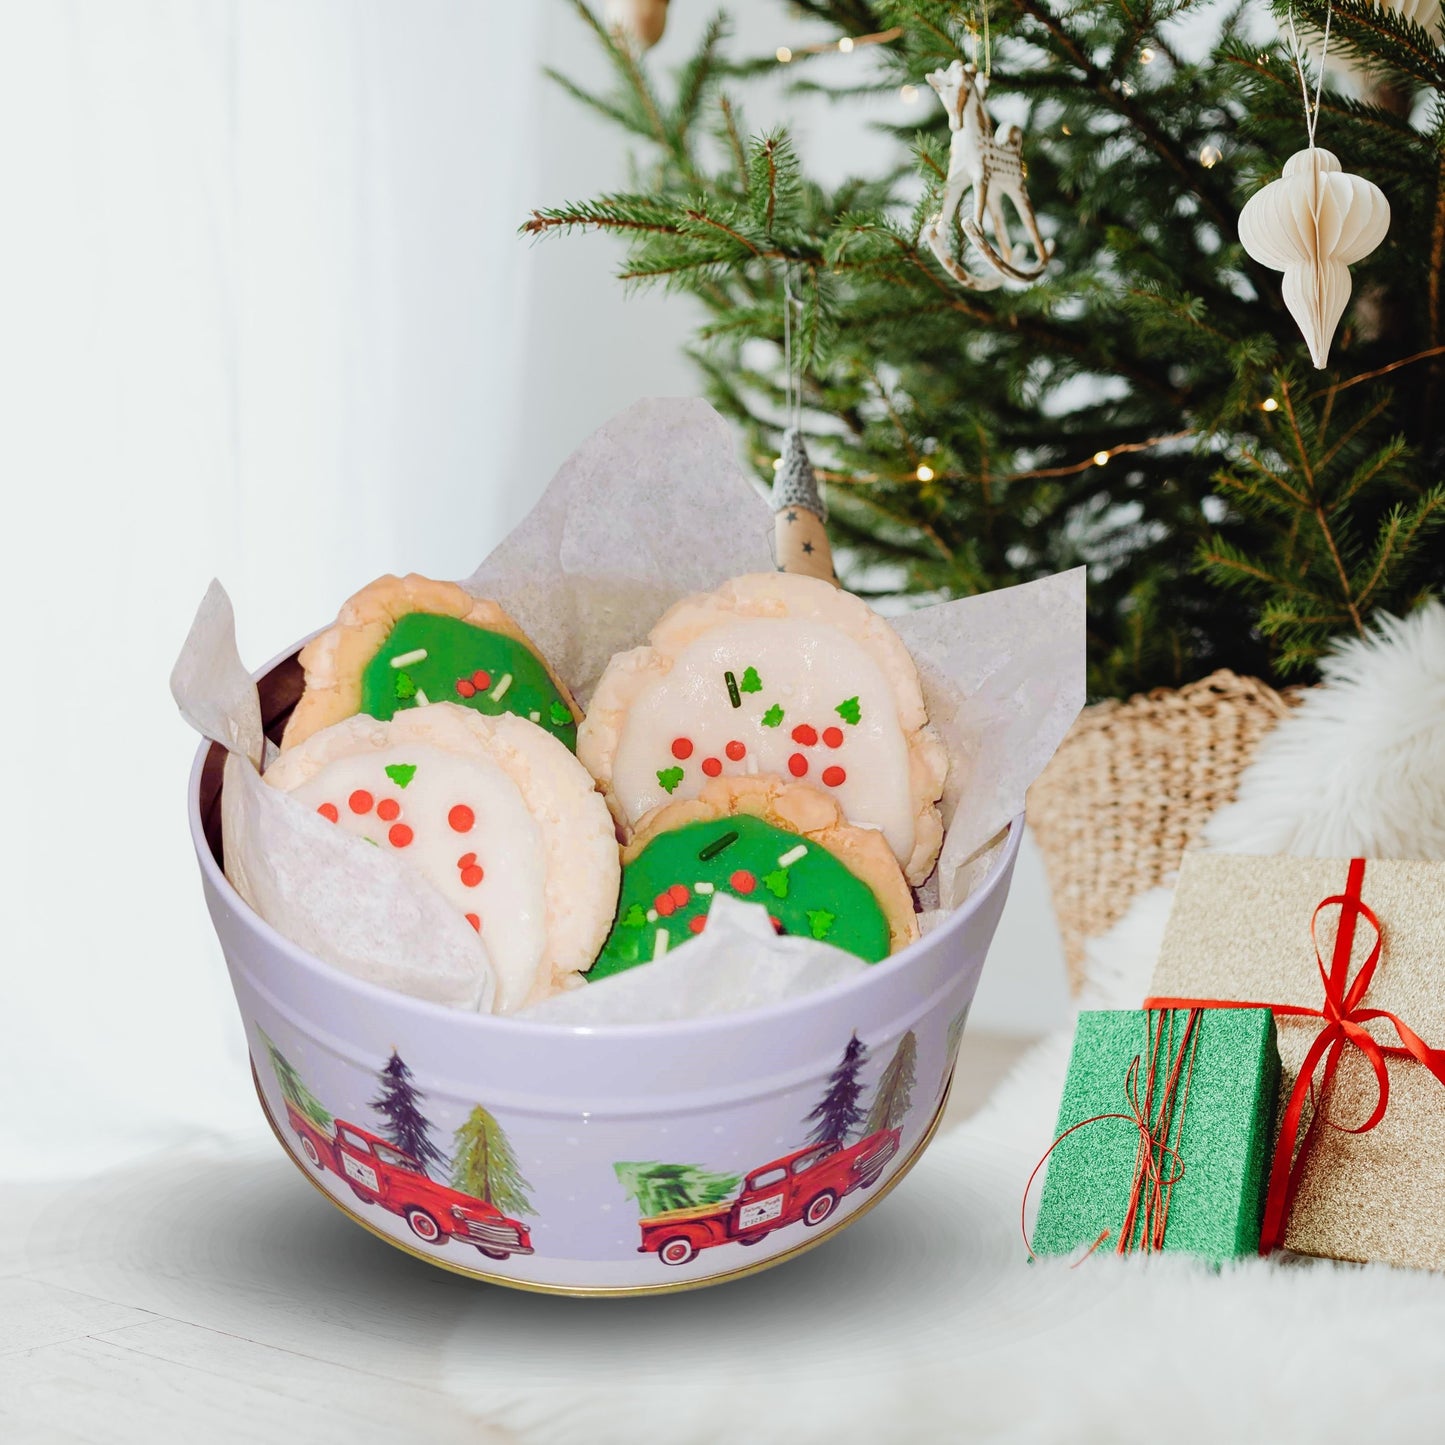 Cafe Delights Christmas Sugar Cookies Scented Soy Wax Melts